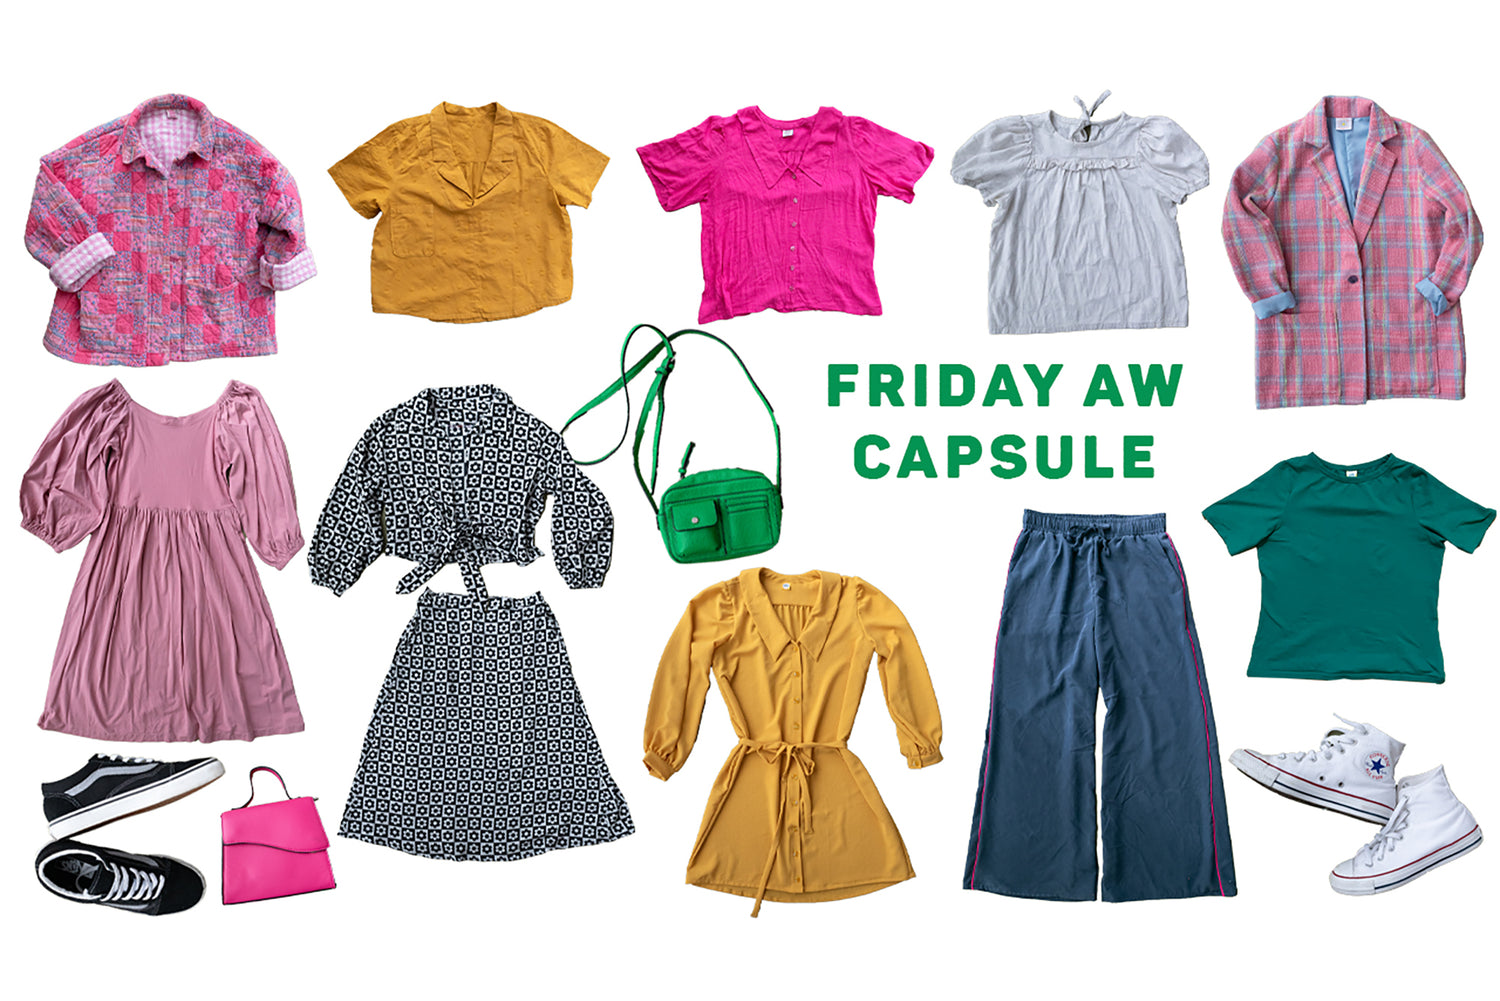 Friday Pattern Company A/W Capsule Me-Made Wardrobe